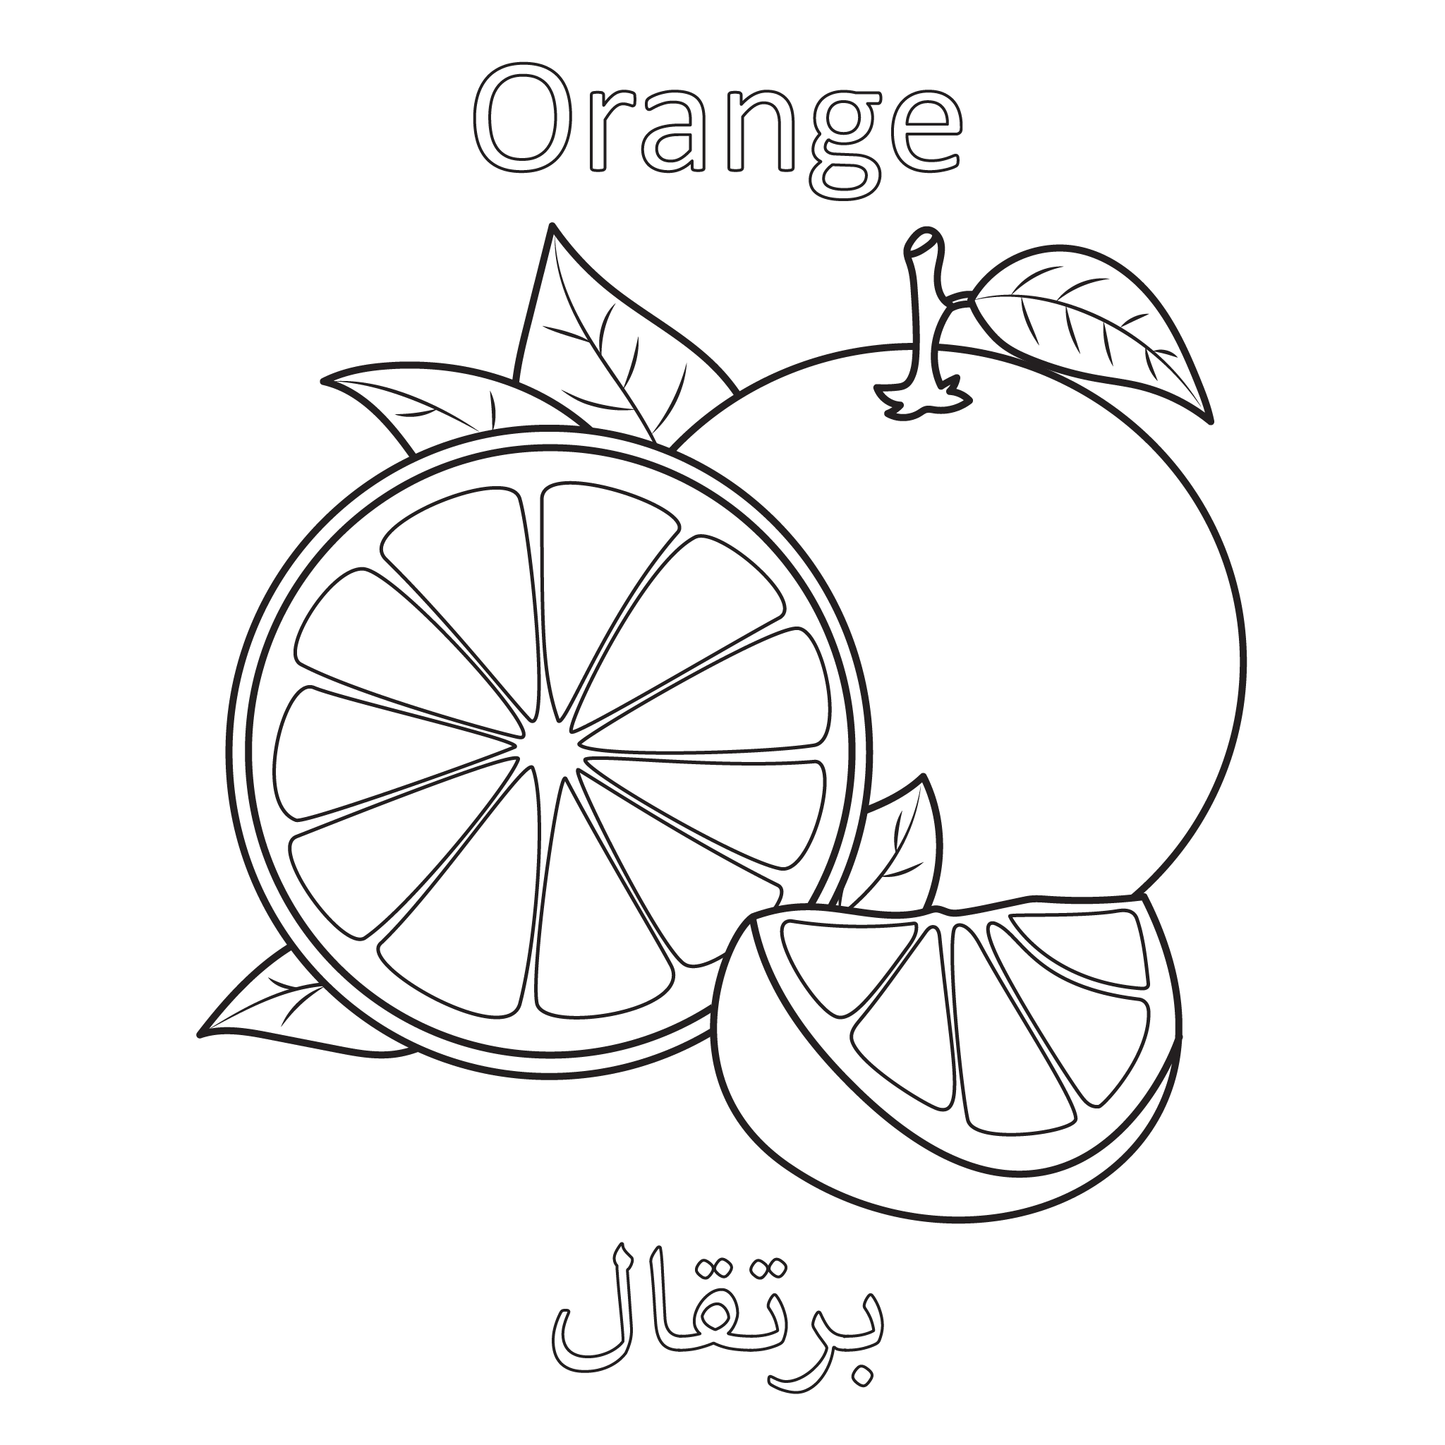 My First Bilingual English Arabic Picture Dictionary Coloring Book 35 Fruits and Vegetables: Simple, Easy-to-Color Large Drawings With Names, Cute Designs With Thick Black Outlines - Perfect for Toddlers Ages 1+